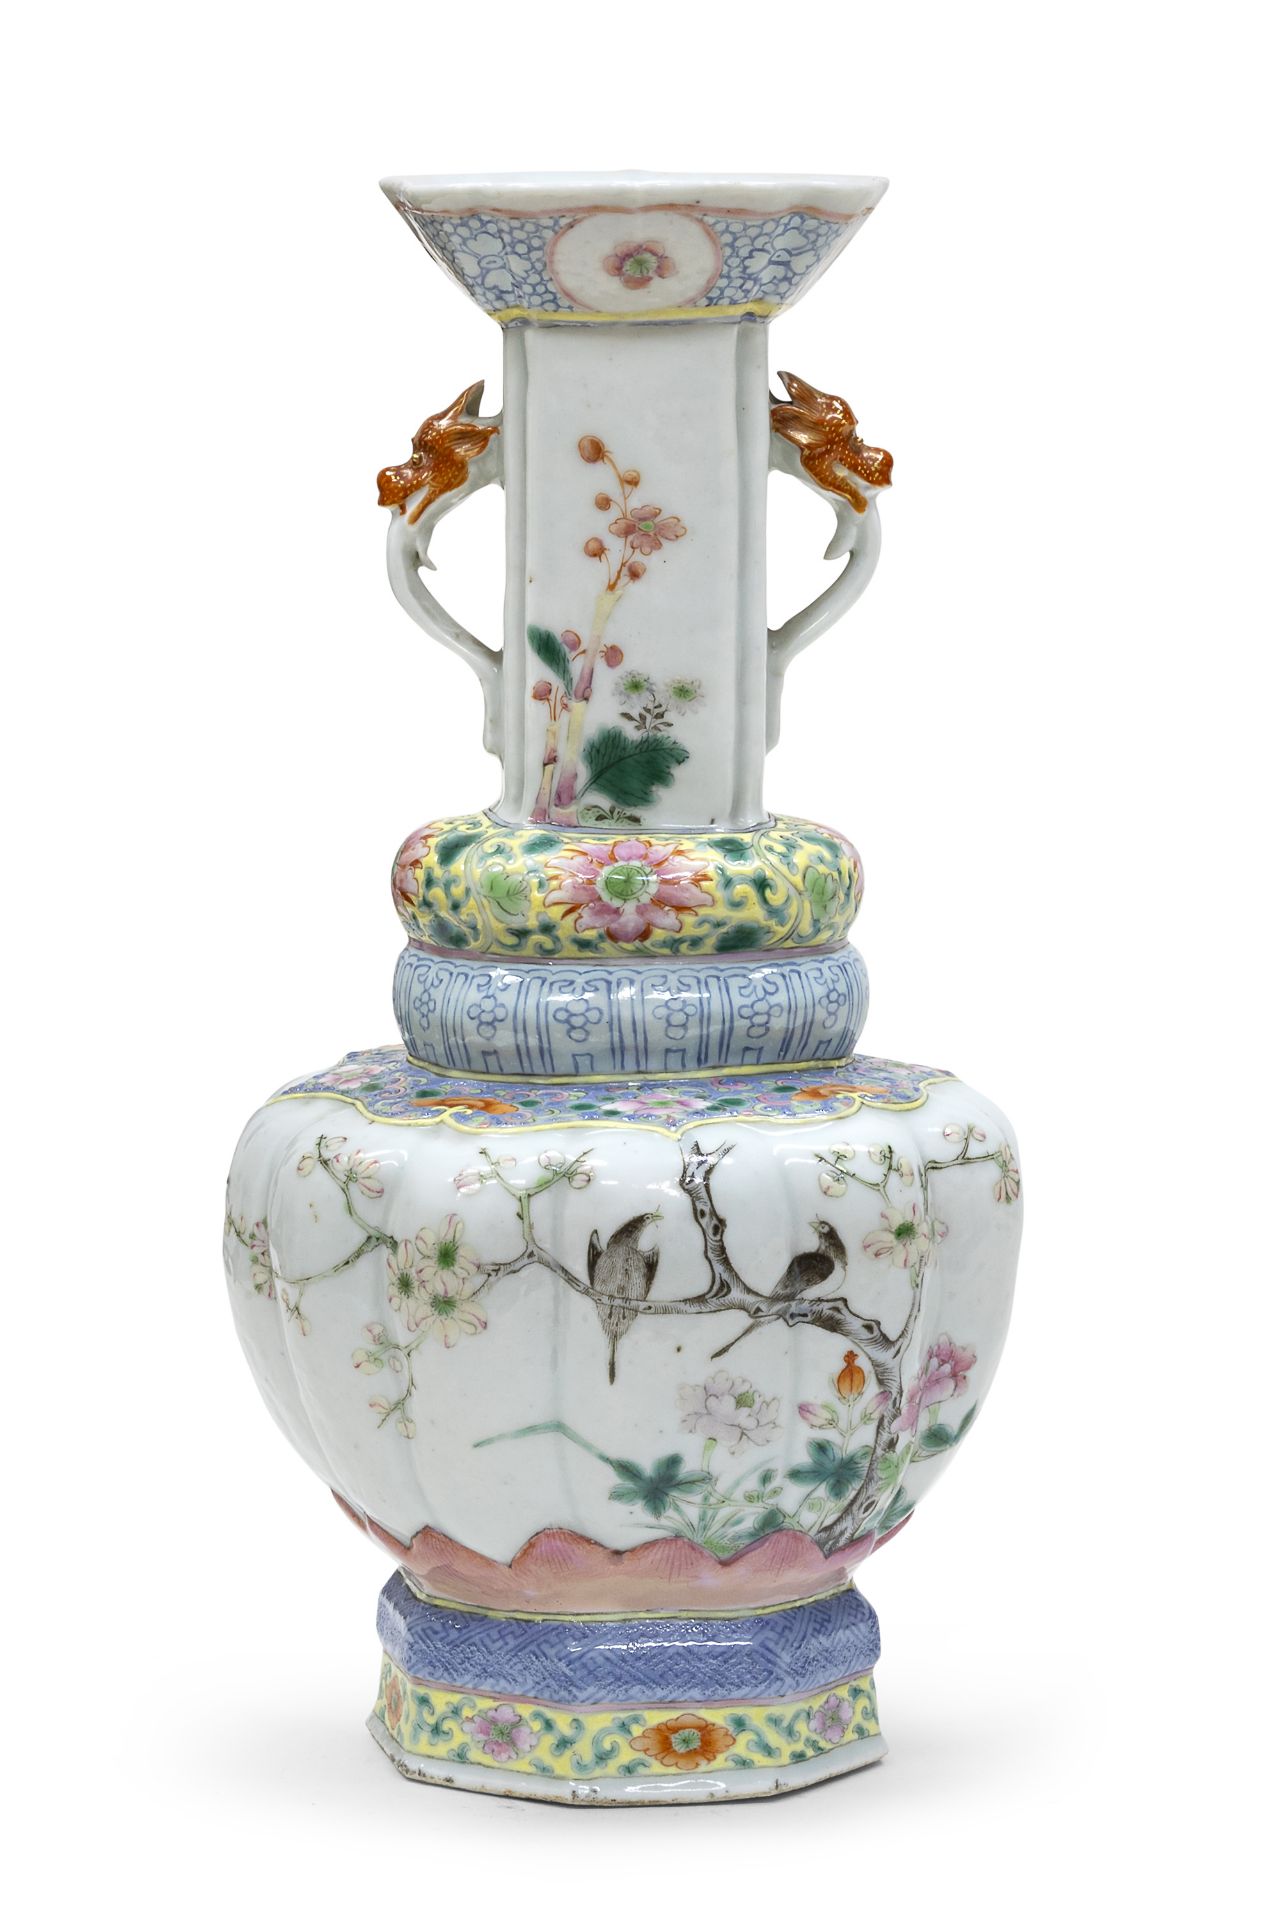 A CHINESE POLYCHROME AND GOLD ENAMELED PORCELAIN VASE LATE 19TH EARLY 20TH CENTURY.